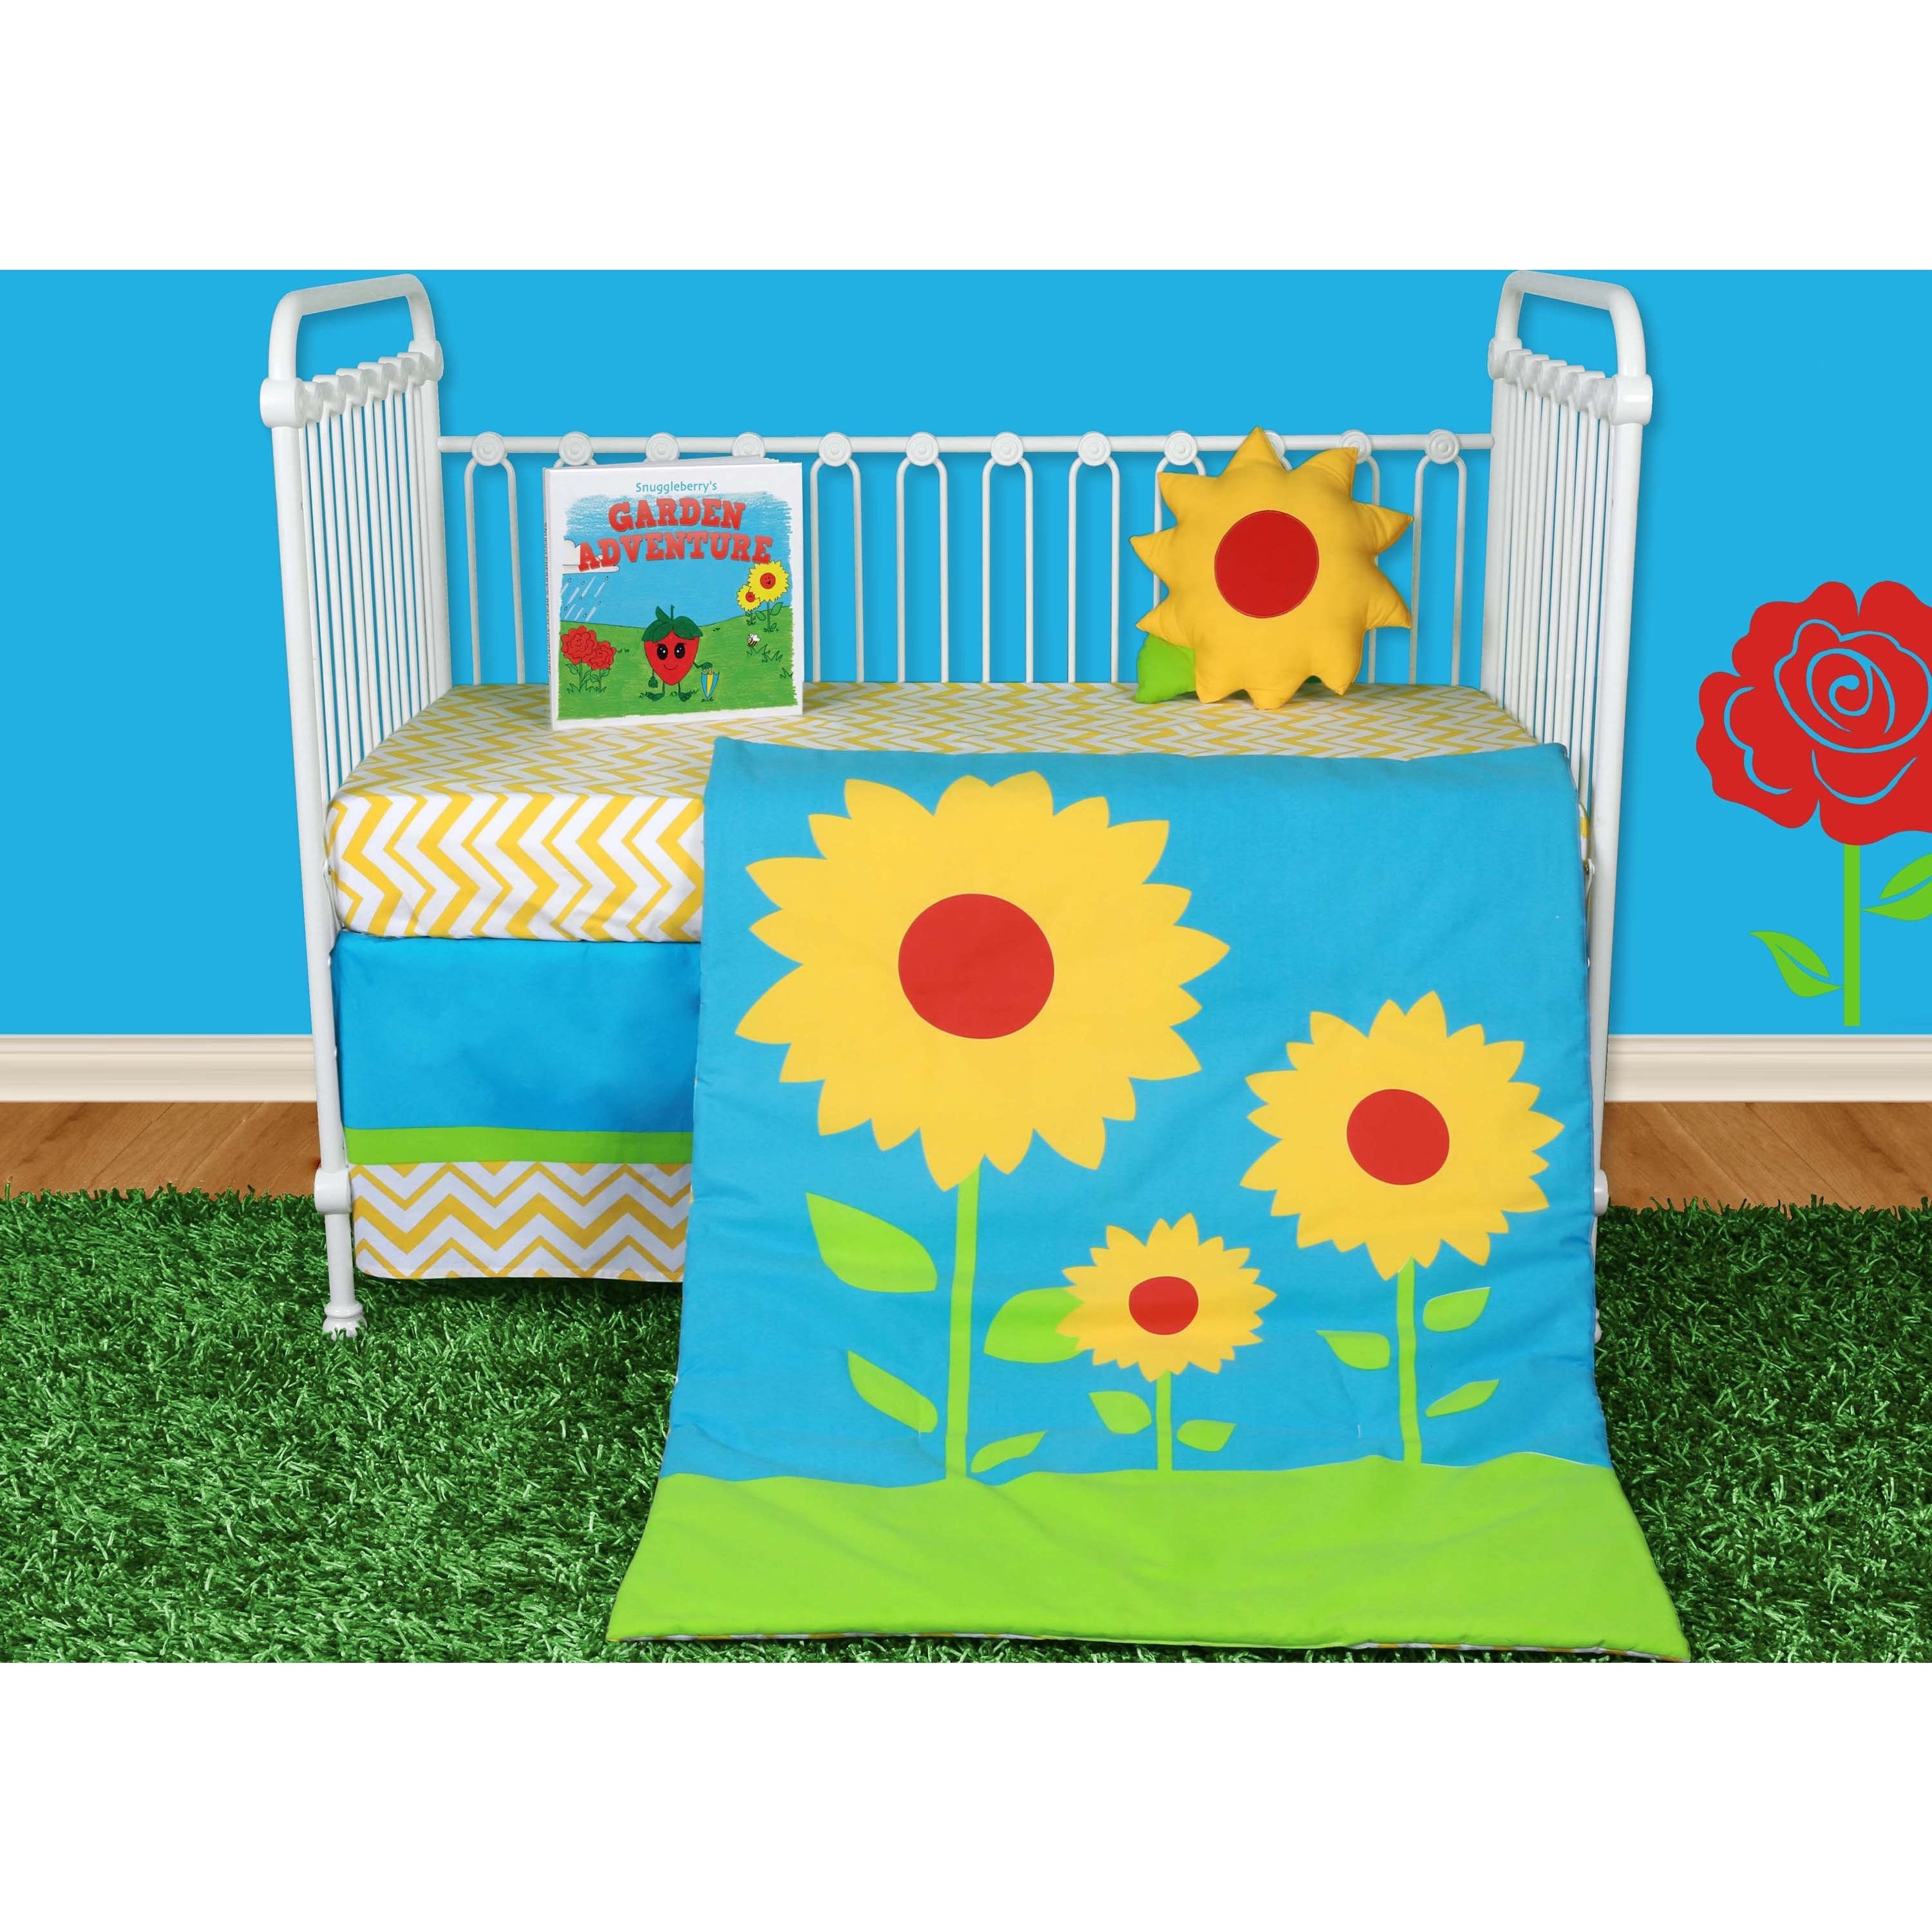 Snuggleberry Baby Sunflower Love 5 Piece Crib Bedding Set with Storybook - image 2 of 5